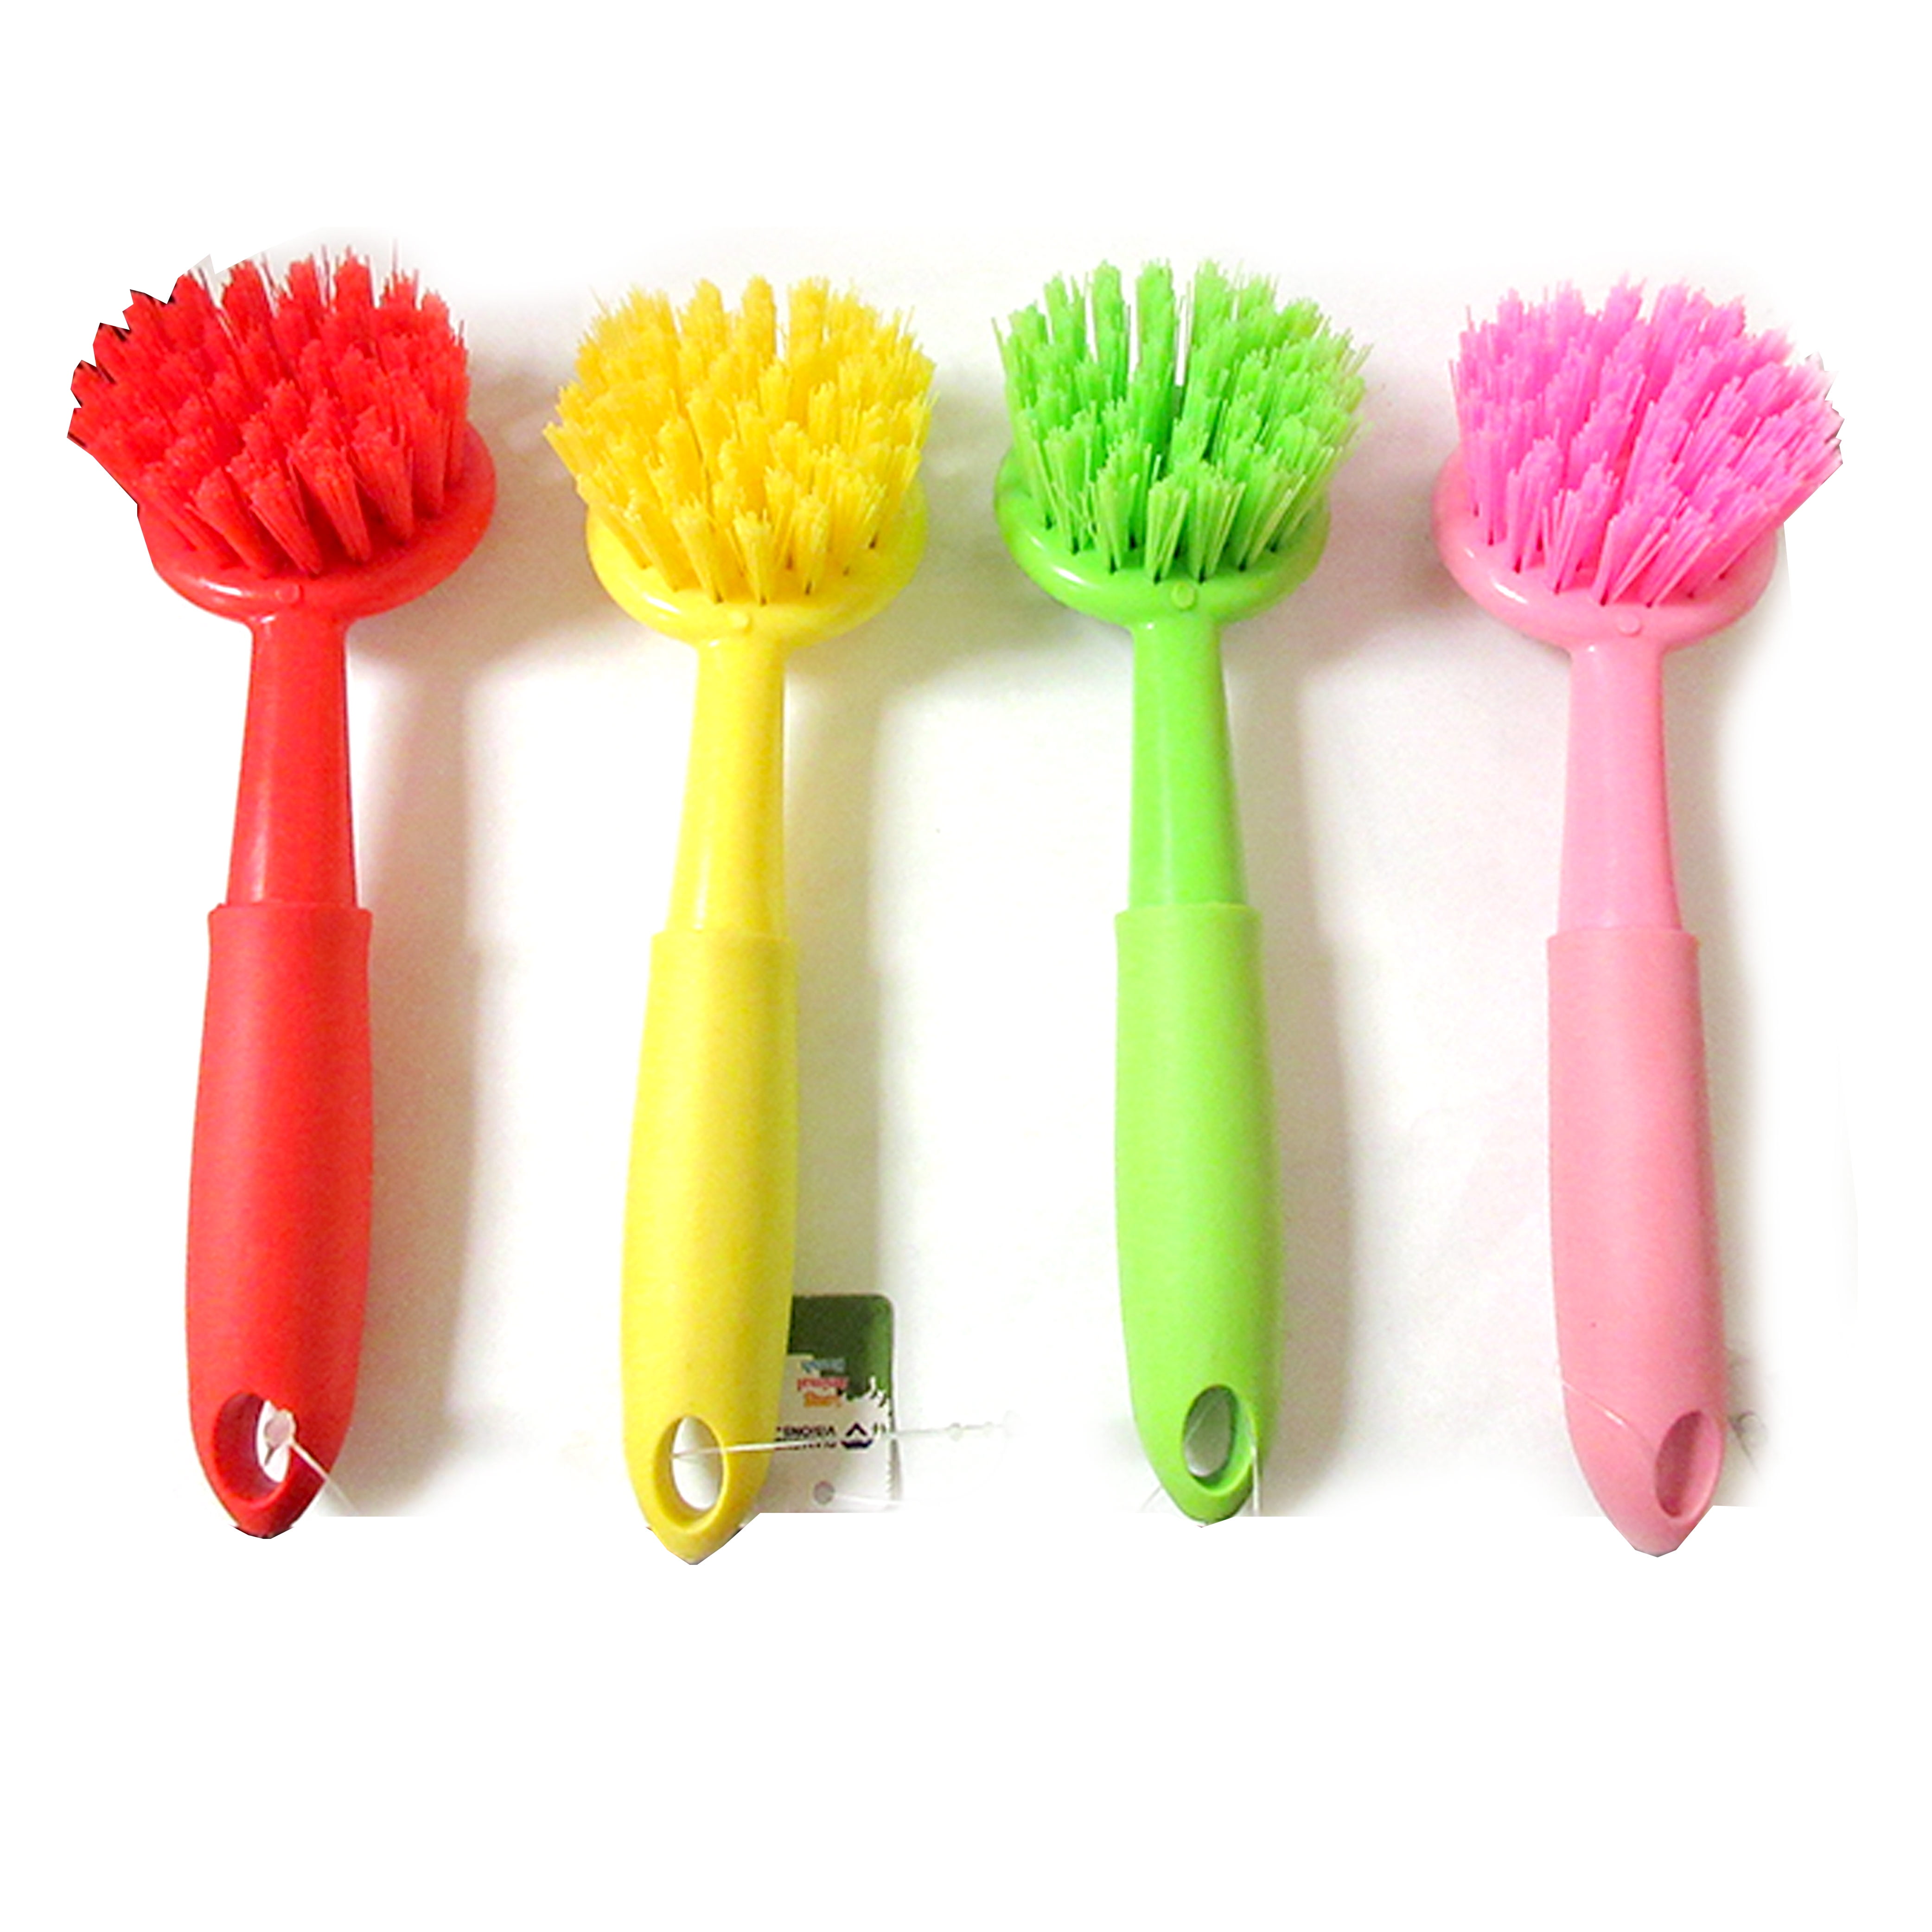 1pc Kitchen Cleaning Brush Animal Duck Pig Dish Potato Vegetable Scrubber Fruit, Red